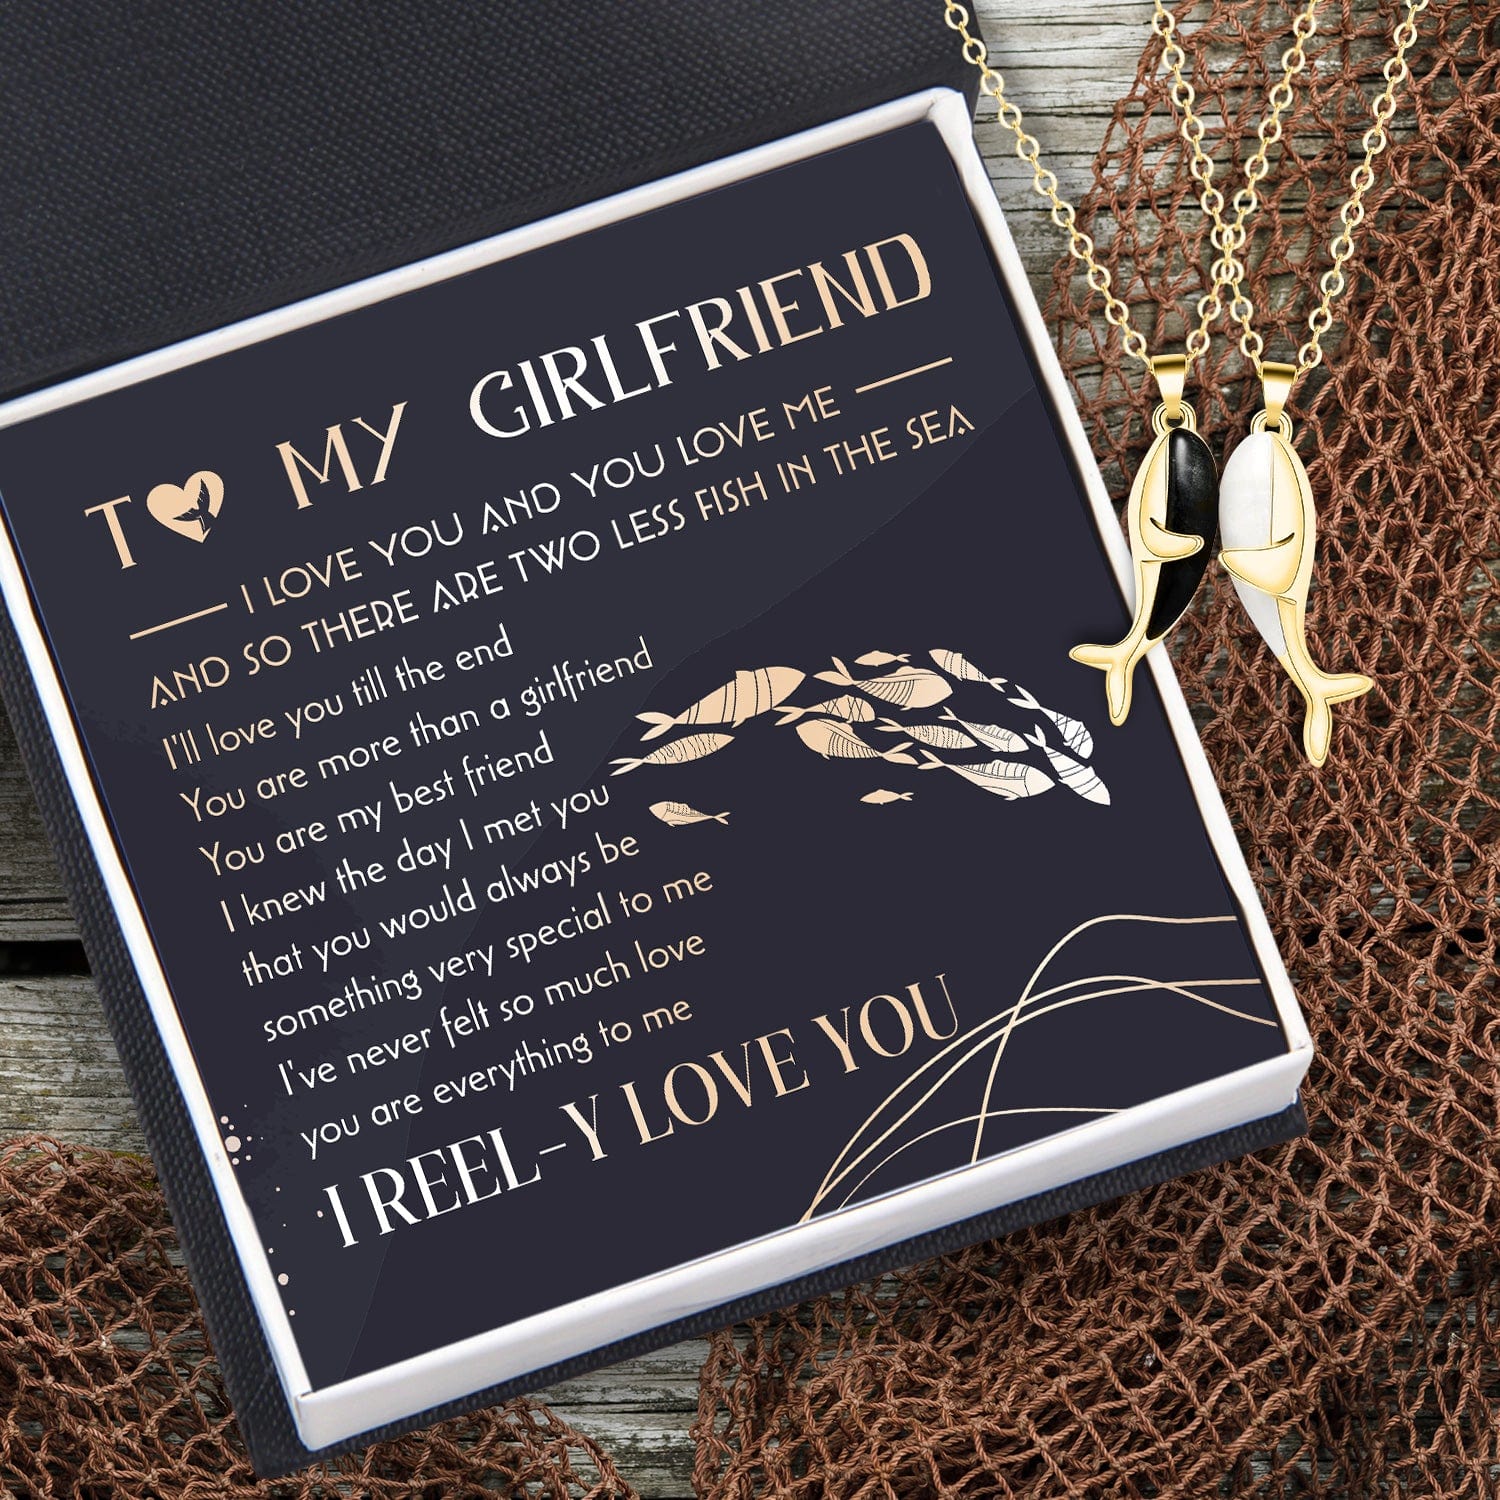 Whale Hug Couple Necklace - Fishing - To My Girlfriend - I'll love you till the end - Gngd13004